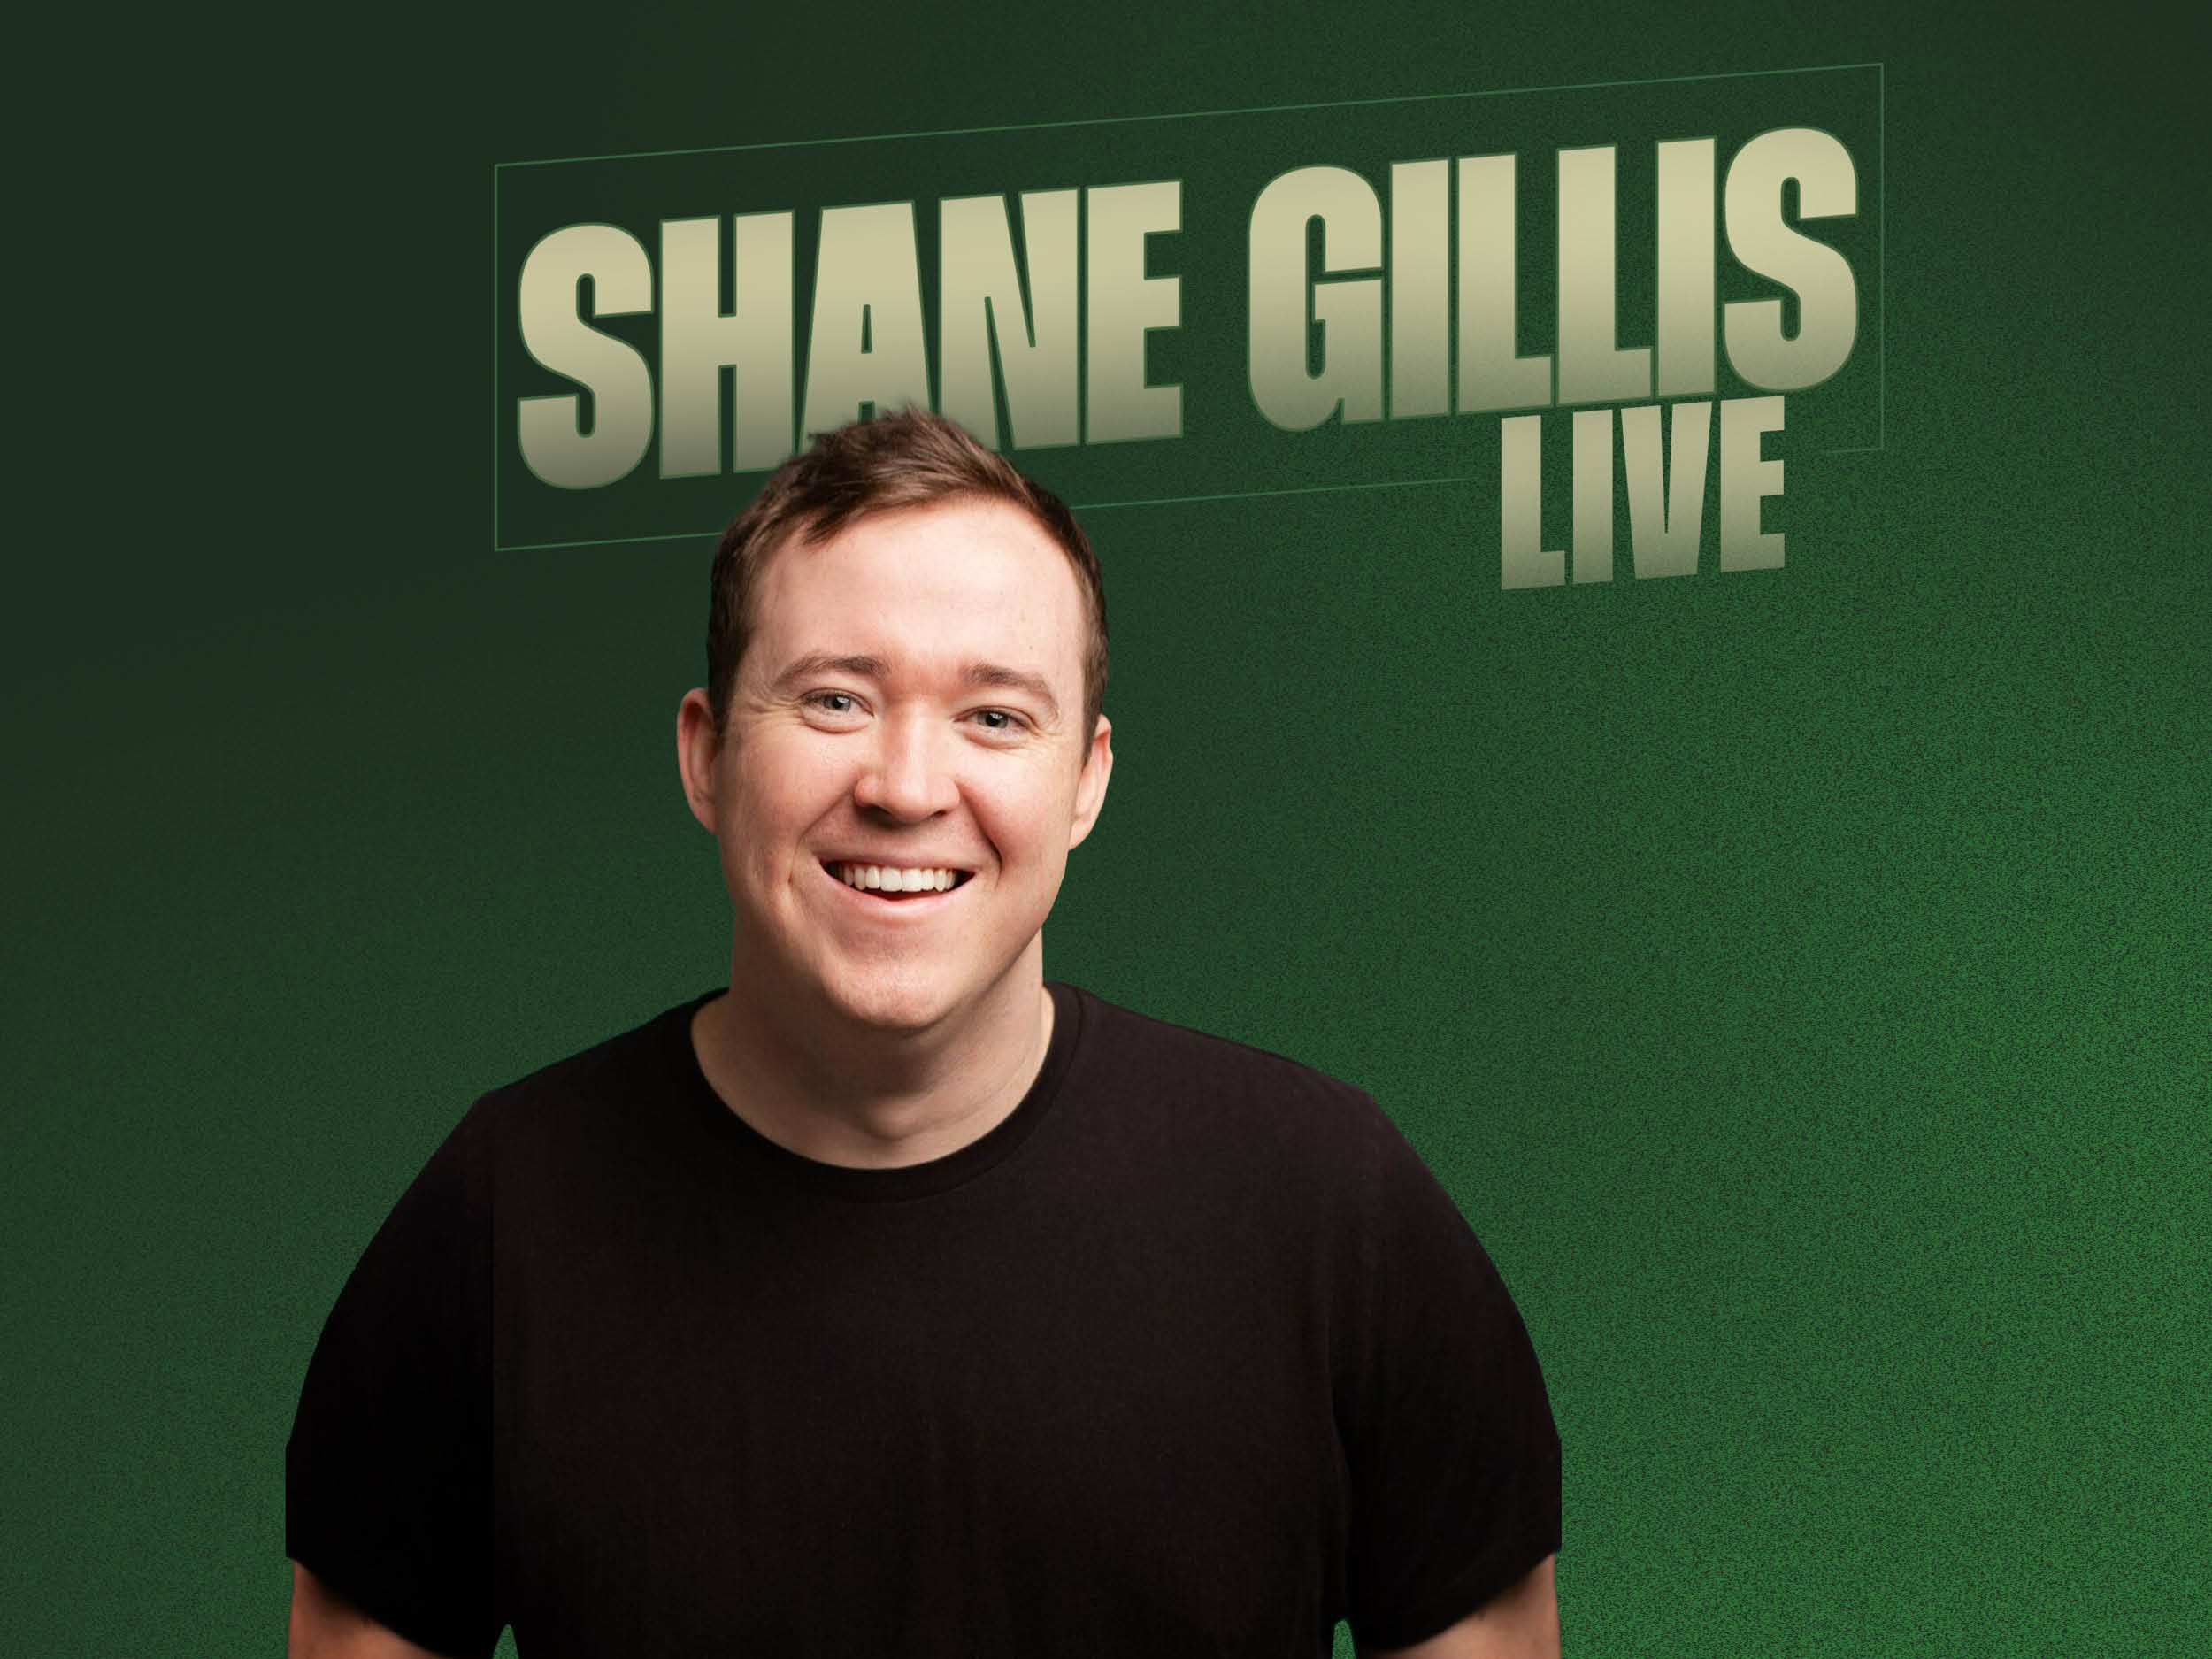 Shane Gillis Live Dr. Phillips Center for the Performing Arts